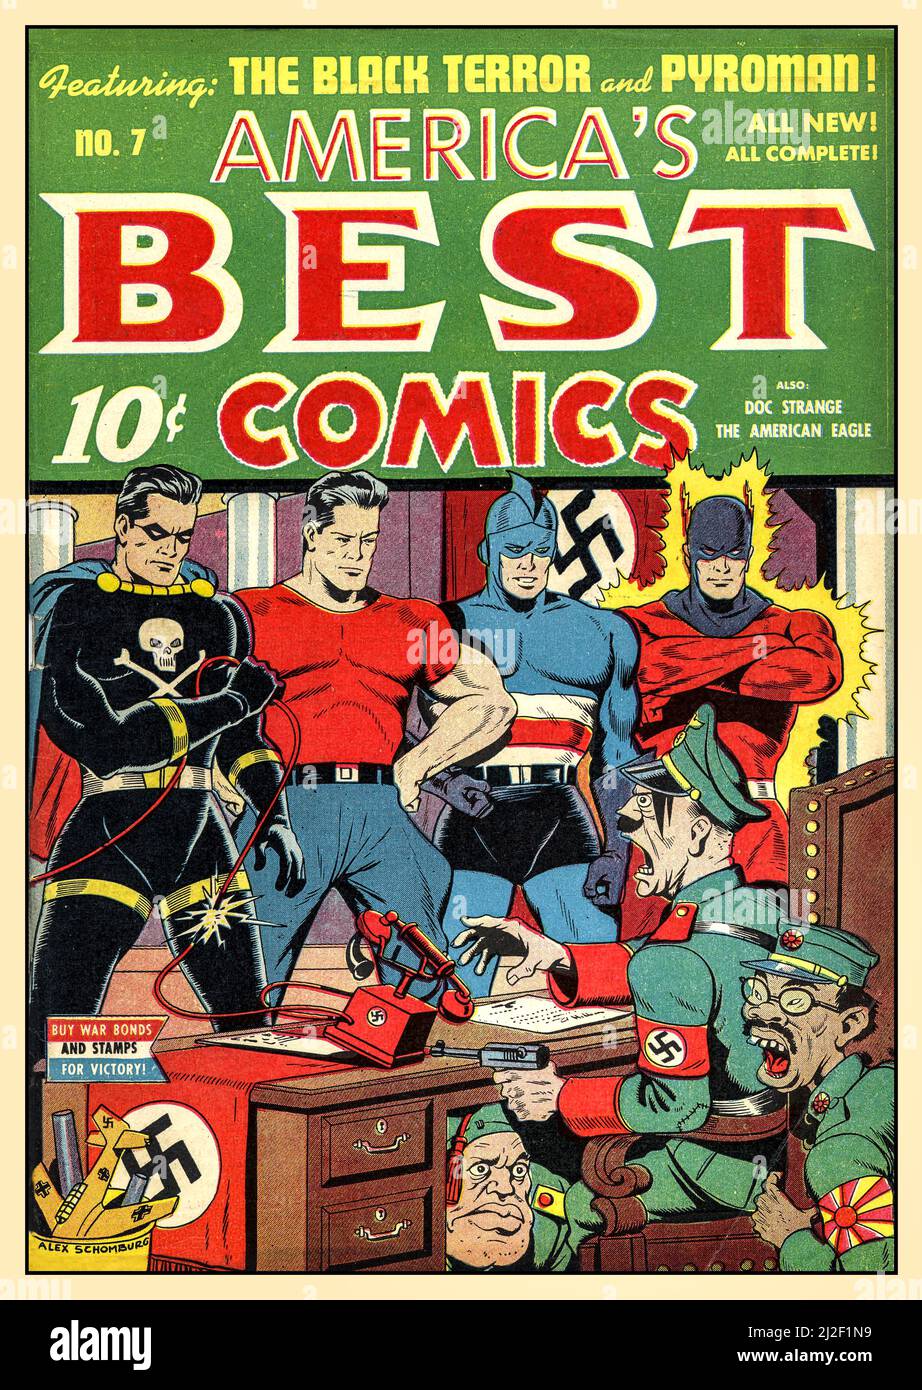 WW2 1940s Americas Best Comics 10 cents Propaganda Cover illustration with super heroes facing off axis powers of Adolf Hitler, Hideki Tojo & Benito Mussolini, with Swastika and Rising Sun symbols. Buy war Bonds and Stamps Appeal banner Stock Photo